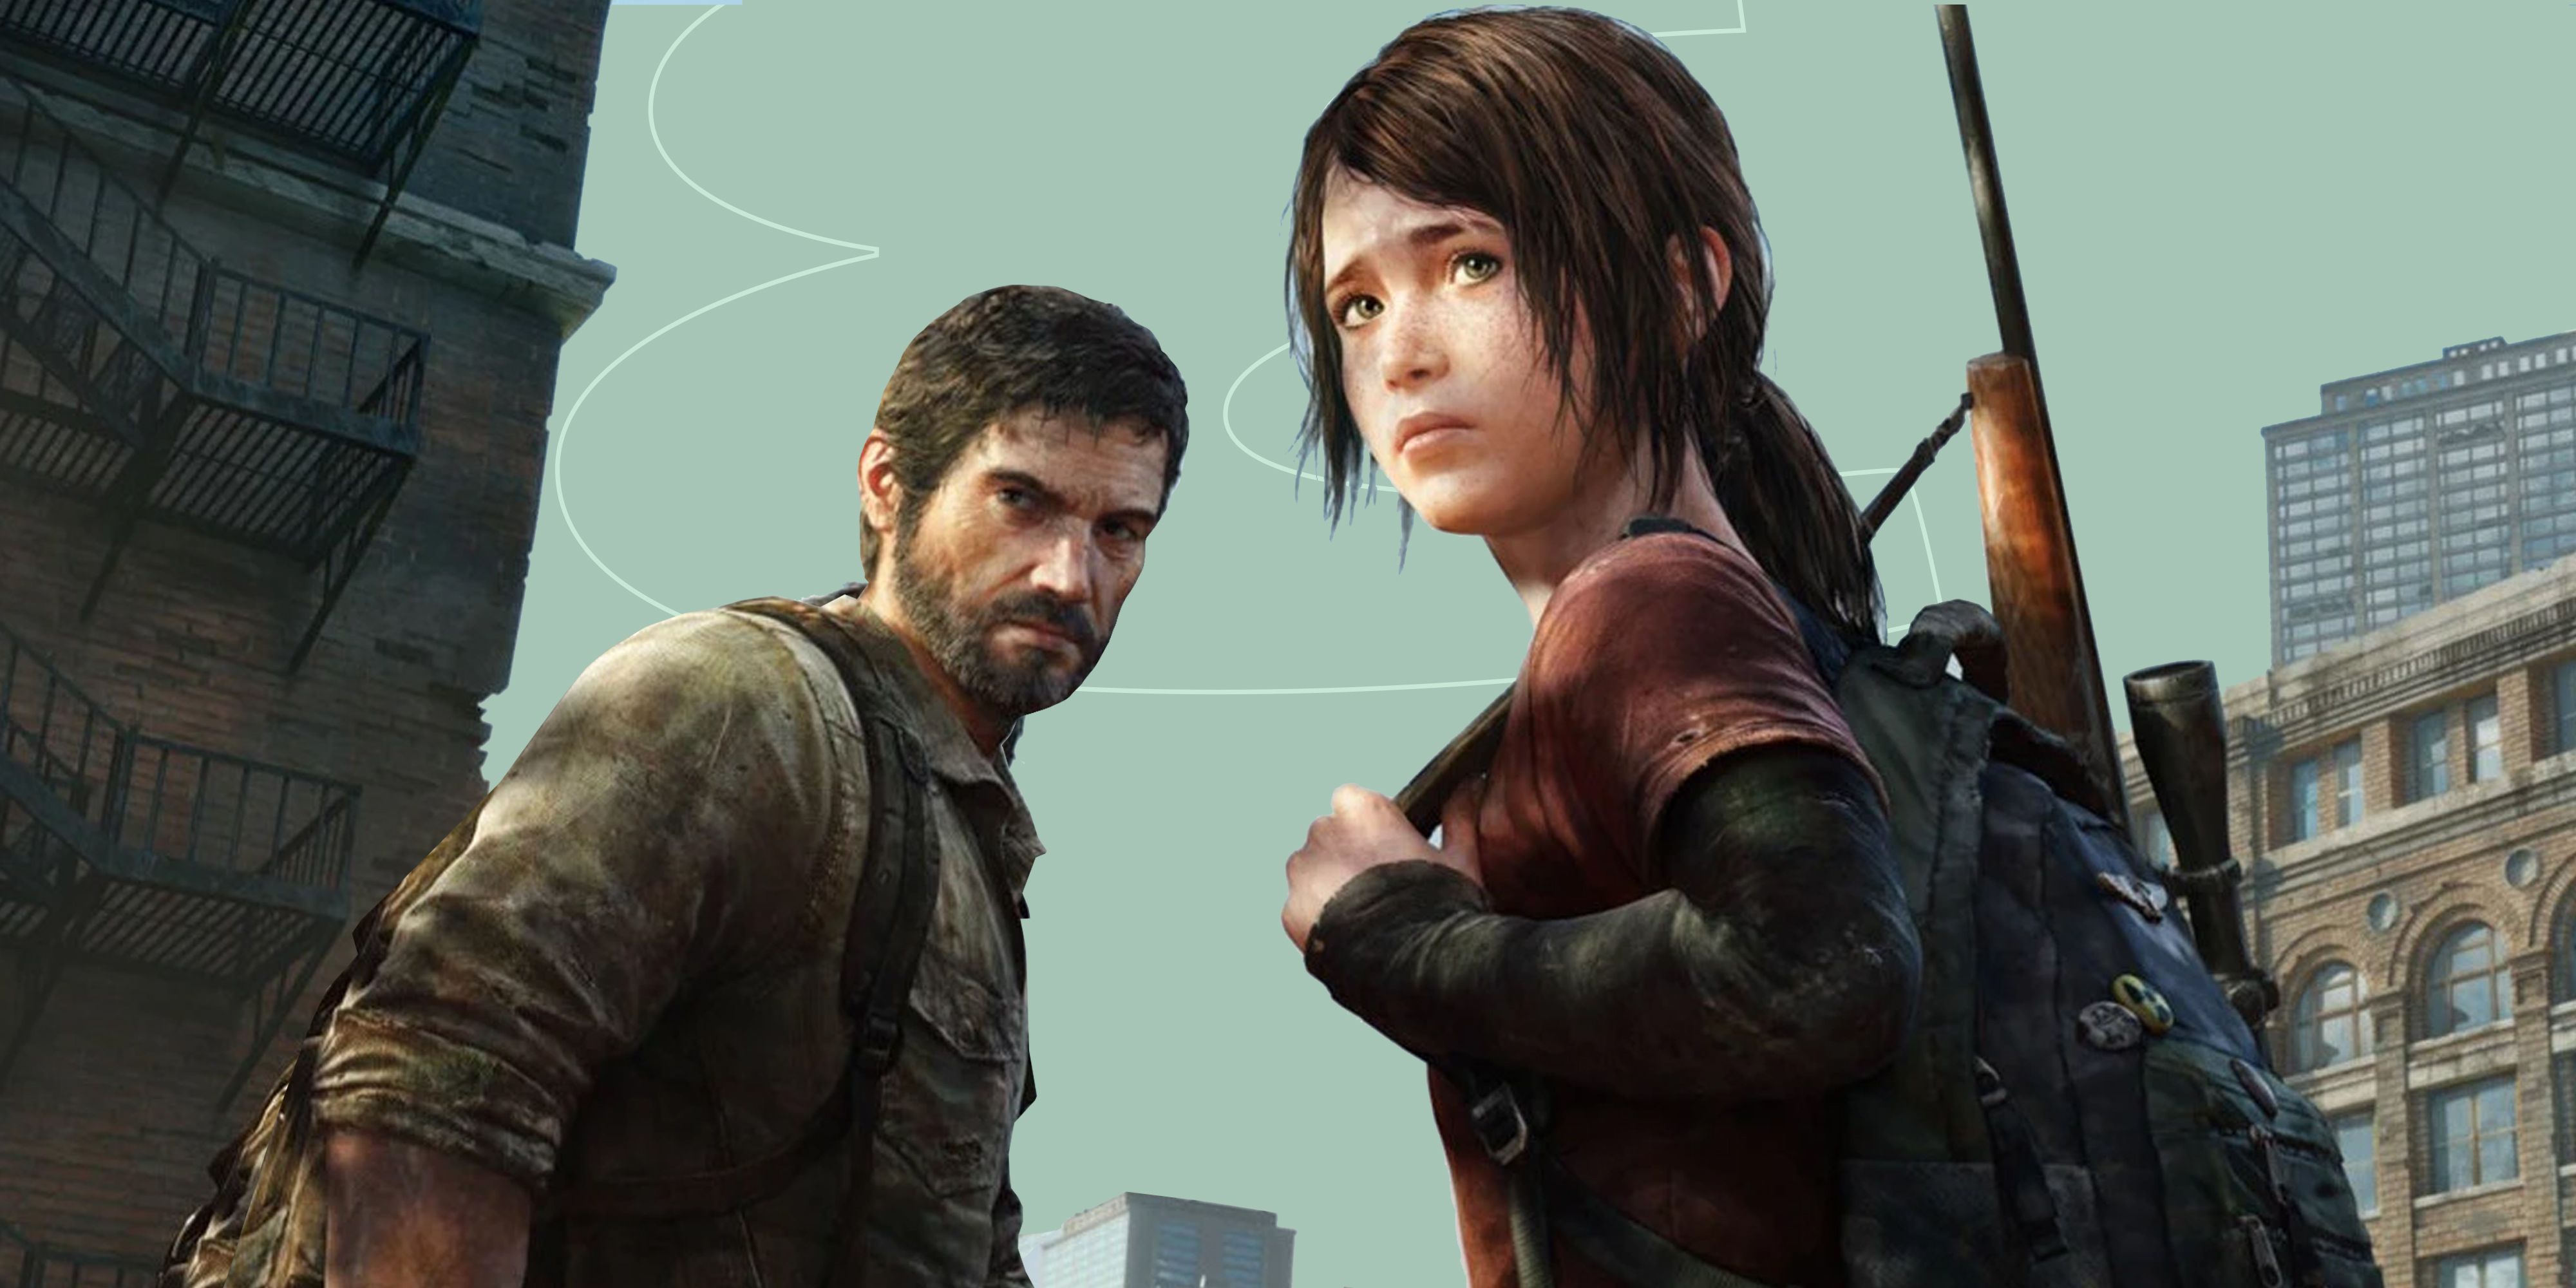 Last Of Us Multiplayer Not Ready To Show, Naughty Dog Says